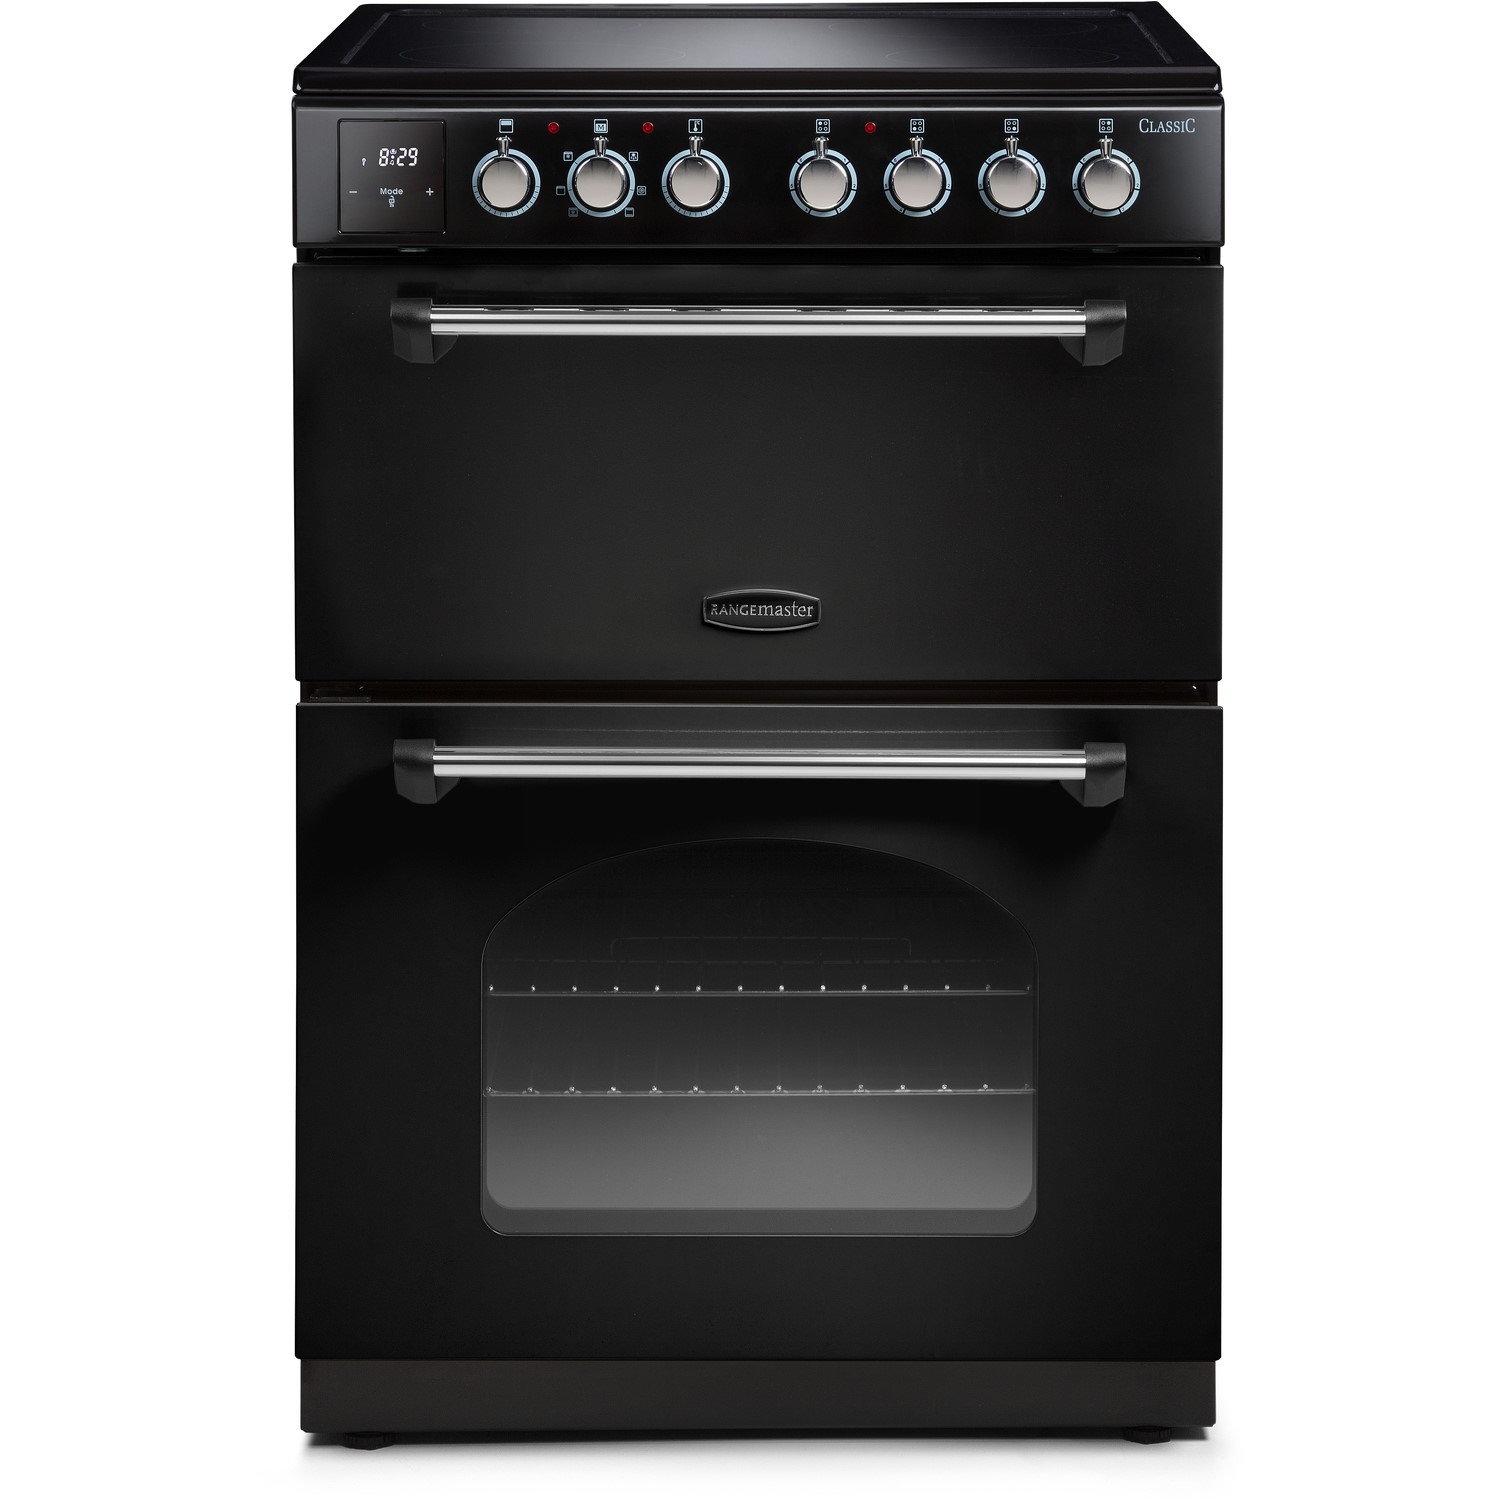 Refurbished Rangemaster Classic 60cm Electric Cooker with Induction Hob - Black